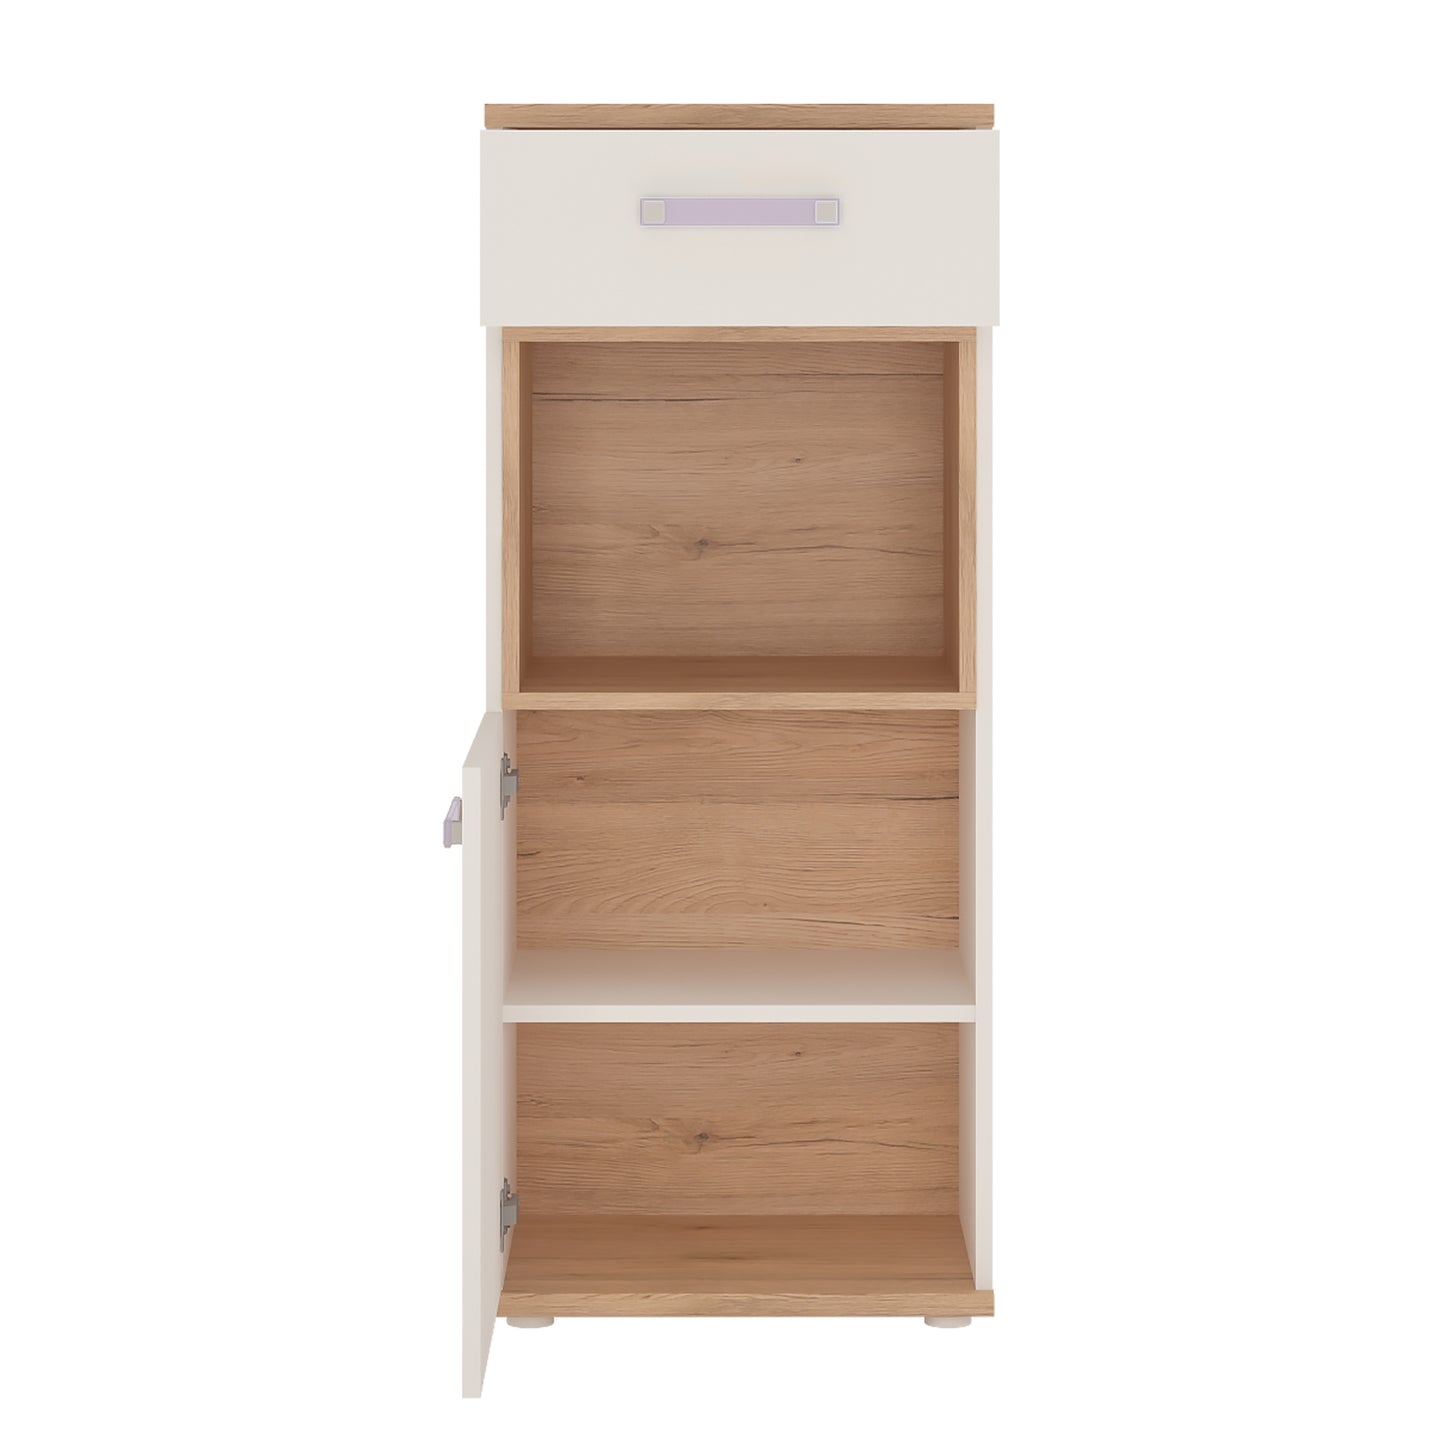 4Kids  1 Door 1 Drawer Narrow Cabinet in Light Oak and white High Gloss (lilac handles)